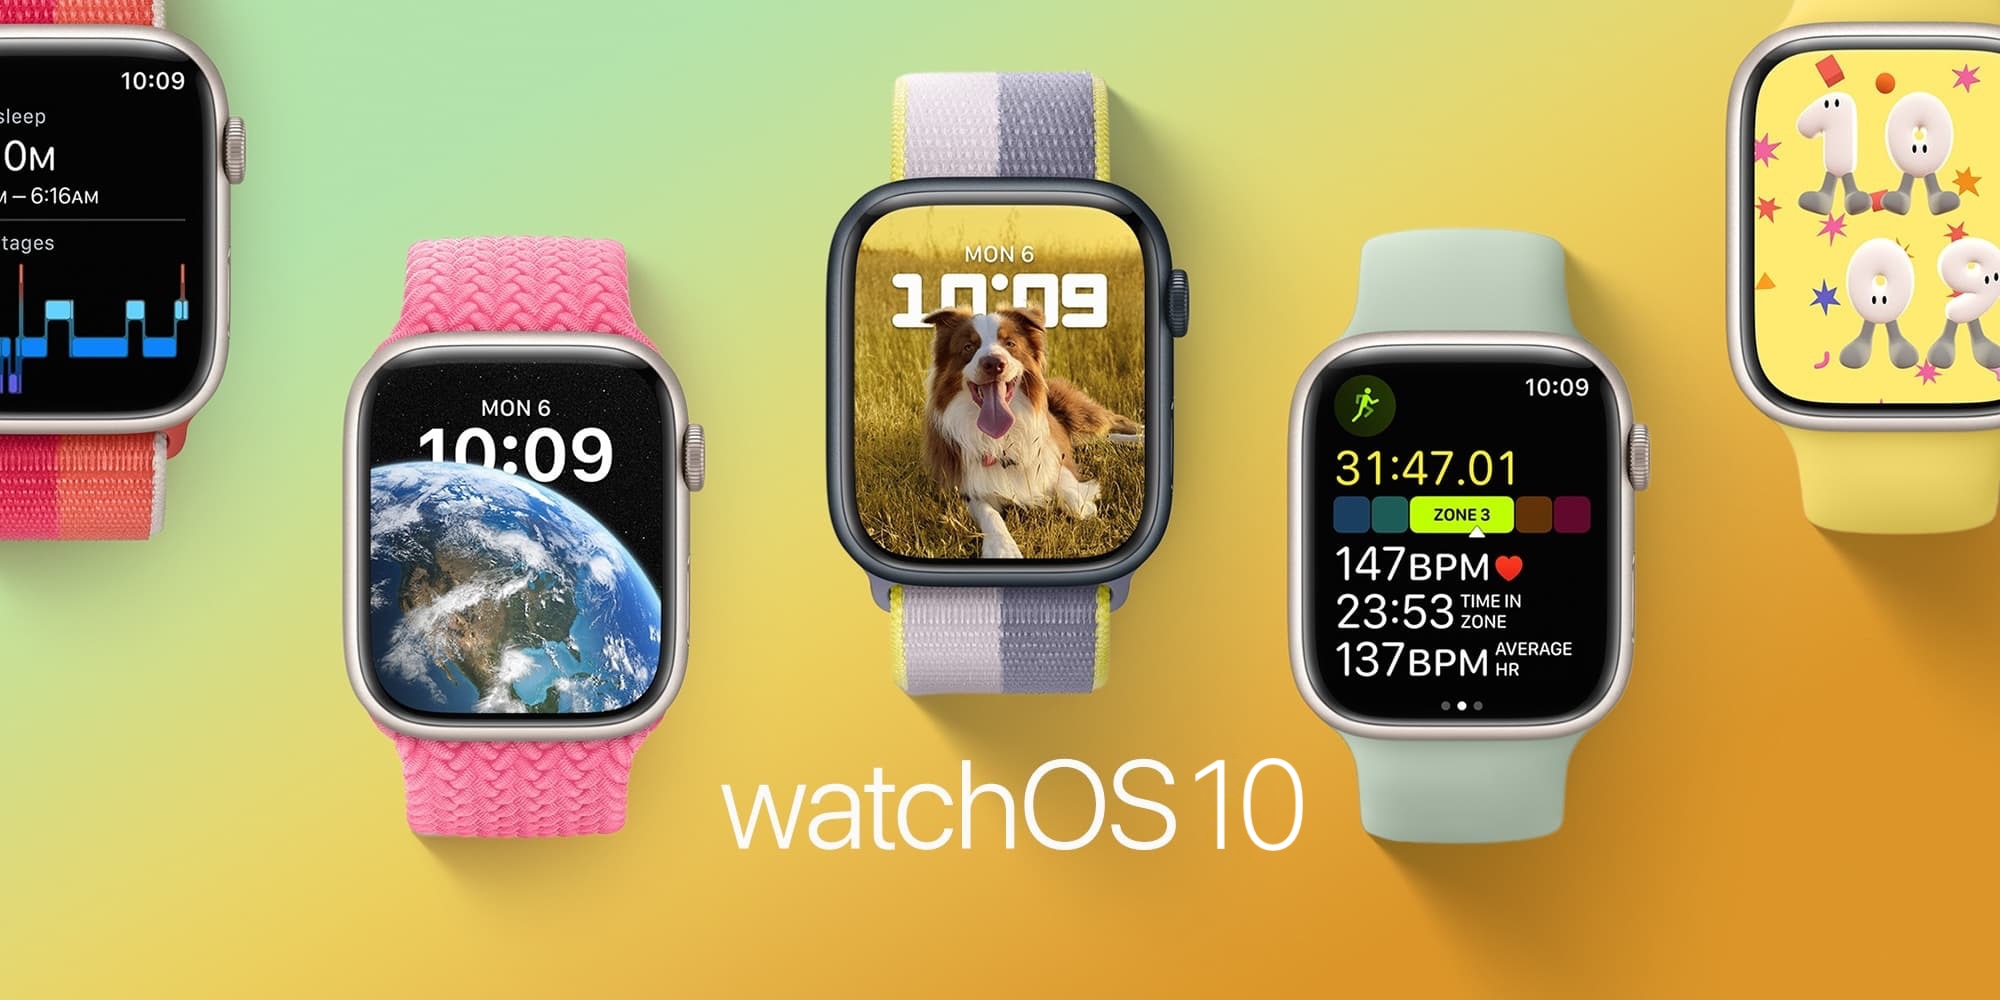 Gurman: watchOS 10 to bring 'notable changes' to Apple Watch user interface  - 9to5Mac